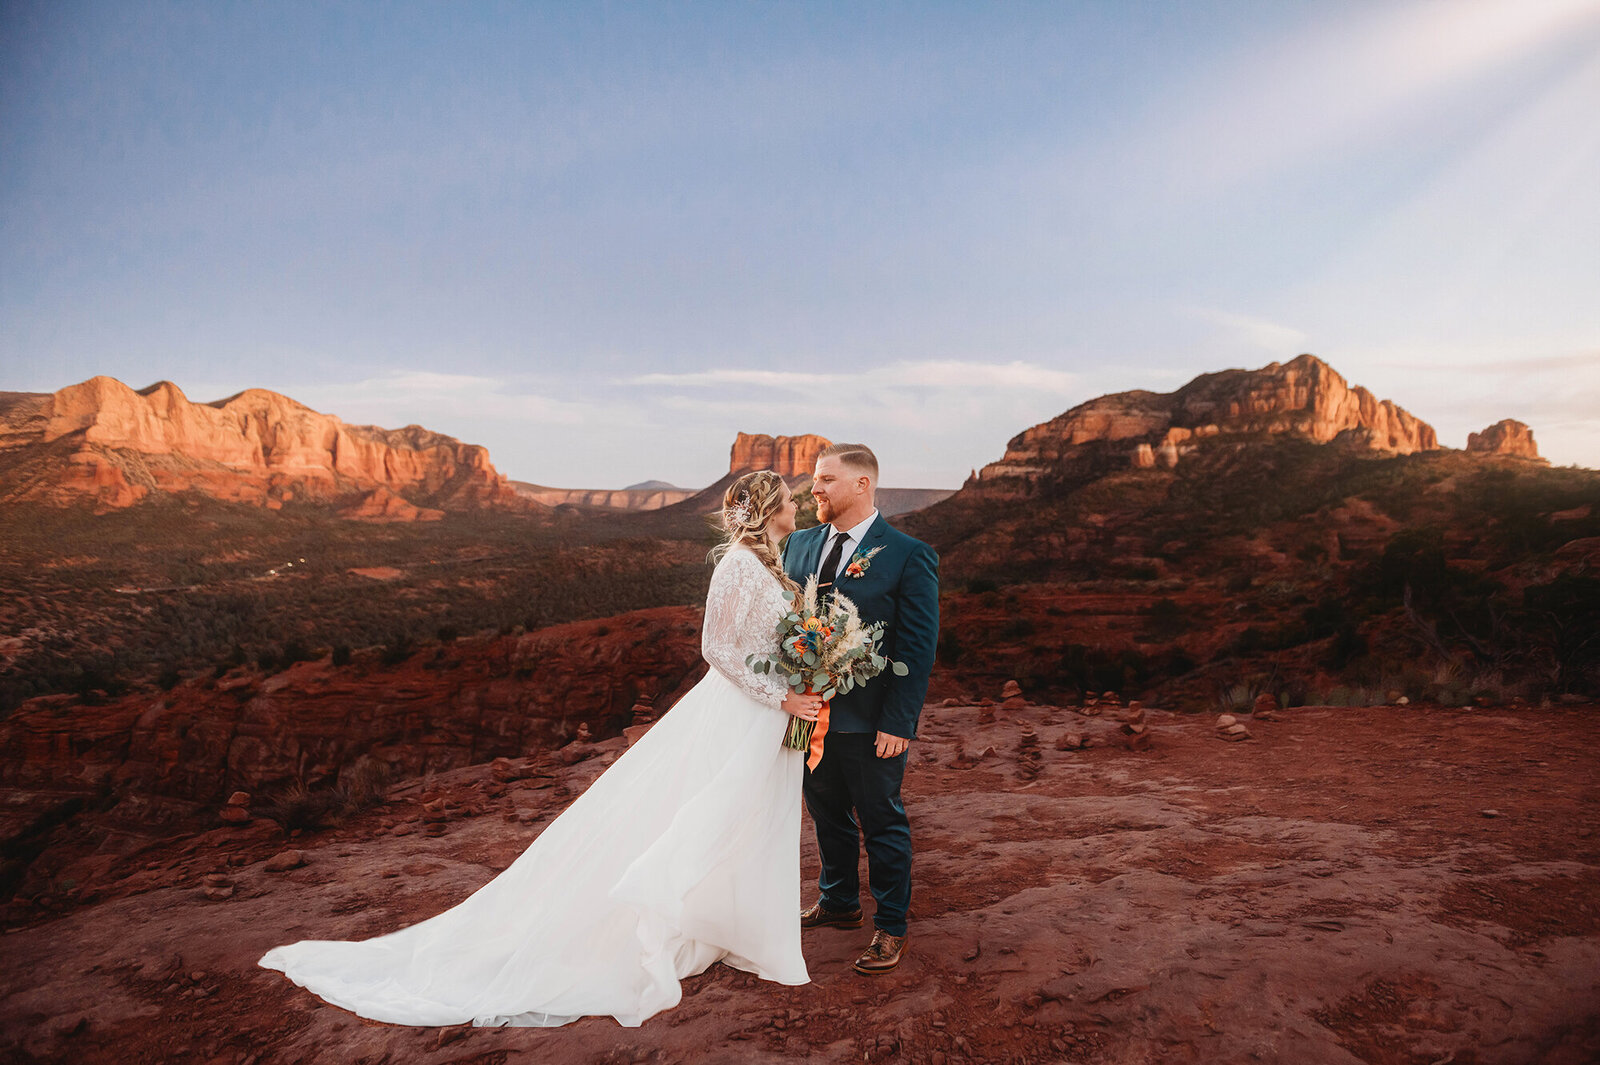 Bride & Groom pose for newlywed portraits after their Micro-Wedding in Sedona Arizona.